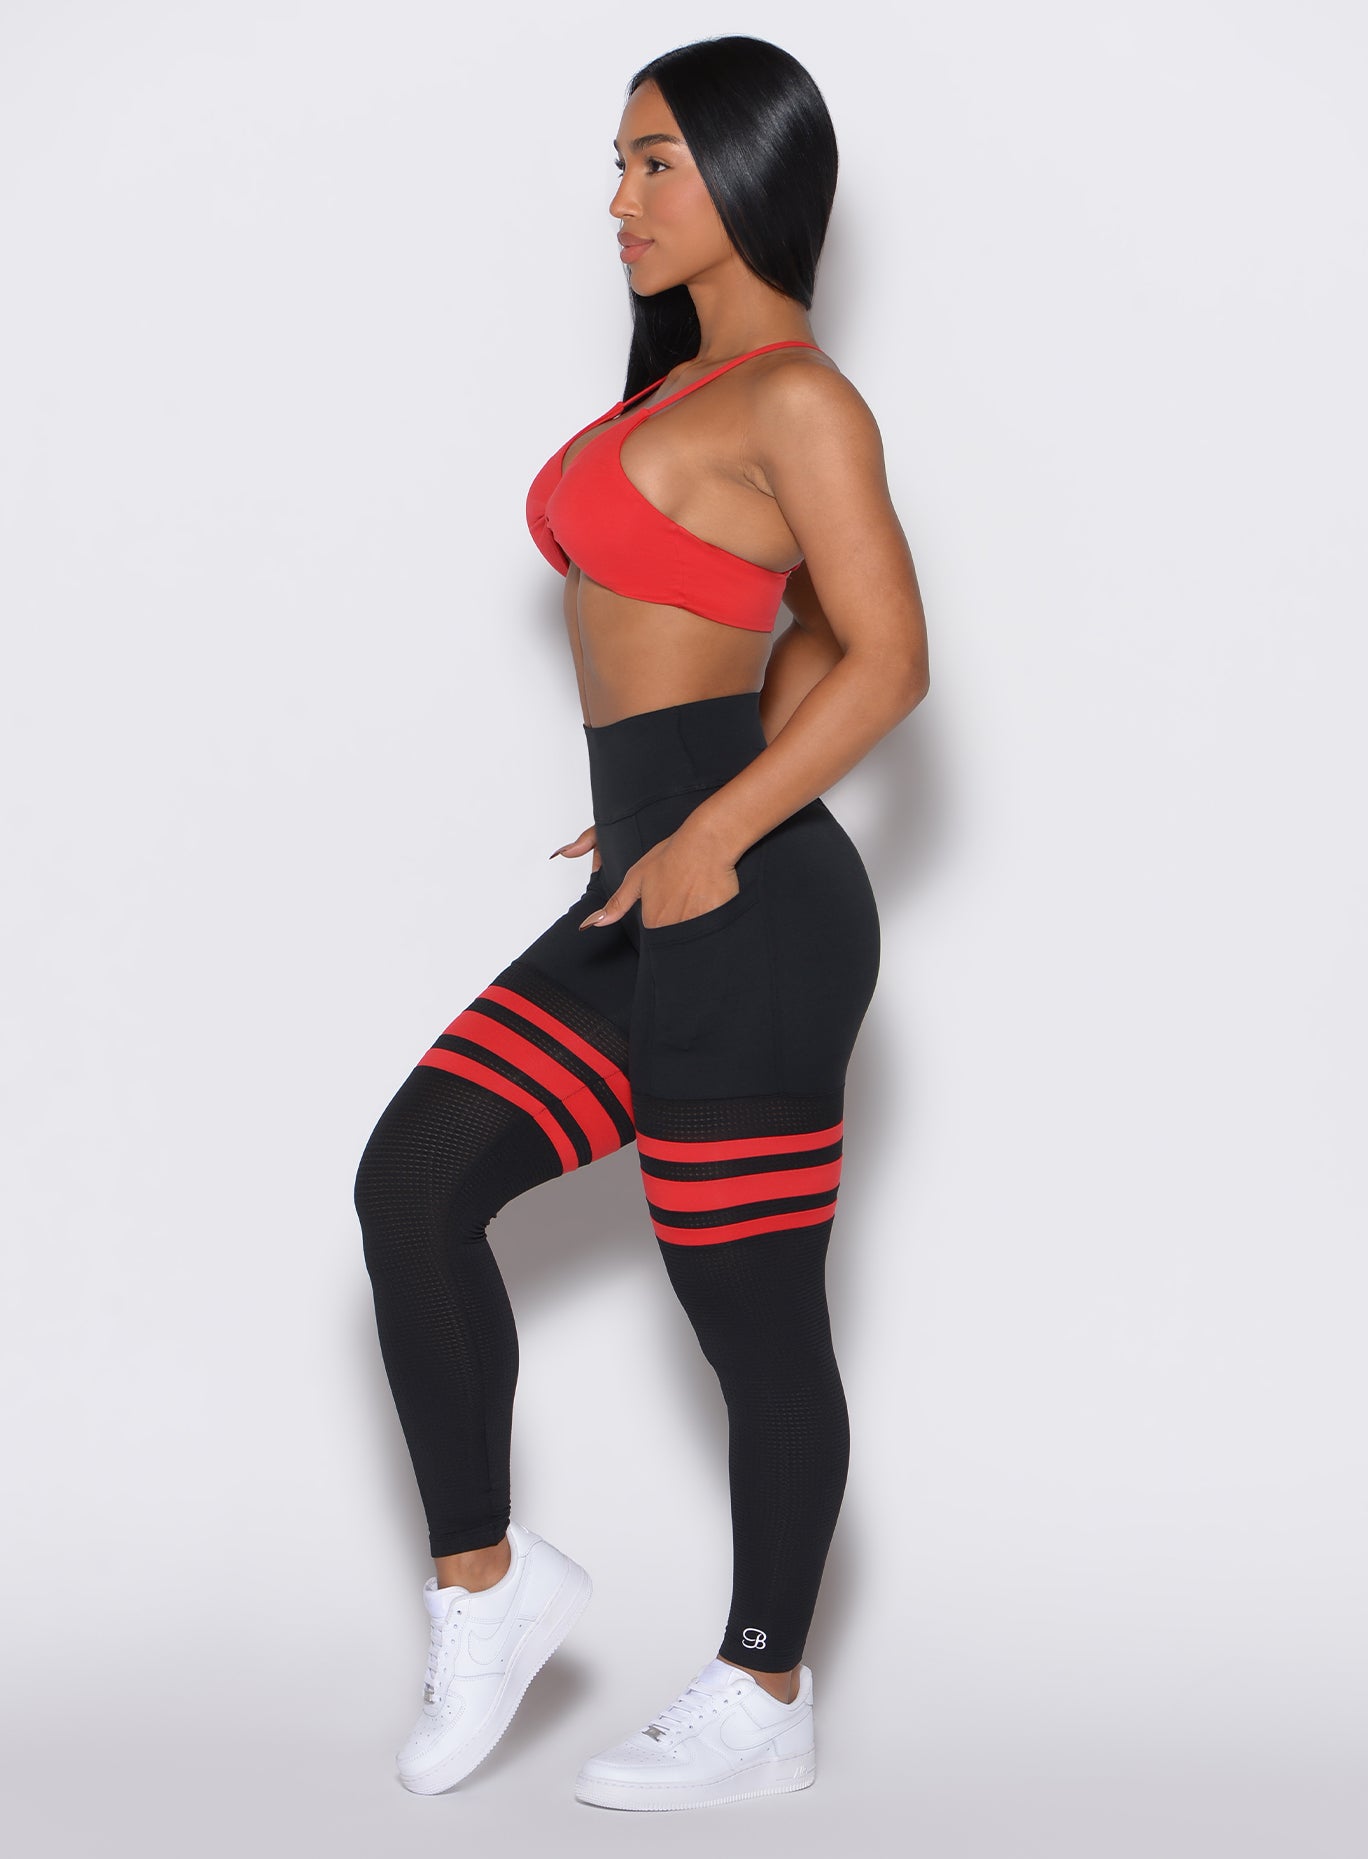 Left profile shot of a model wearing the Perform Thigh Highs in Black Fire color along with a matching sports bra 